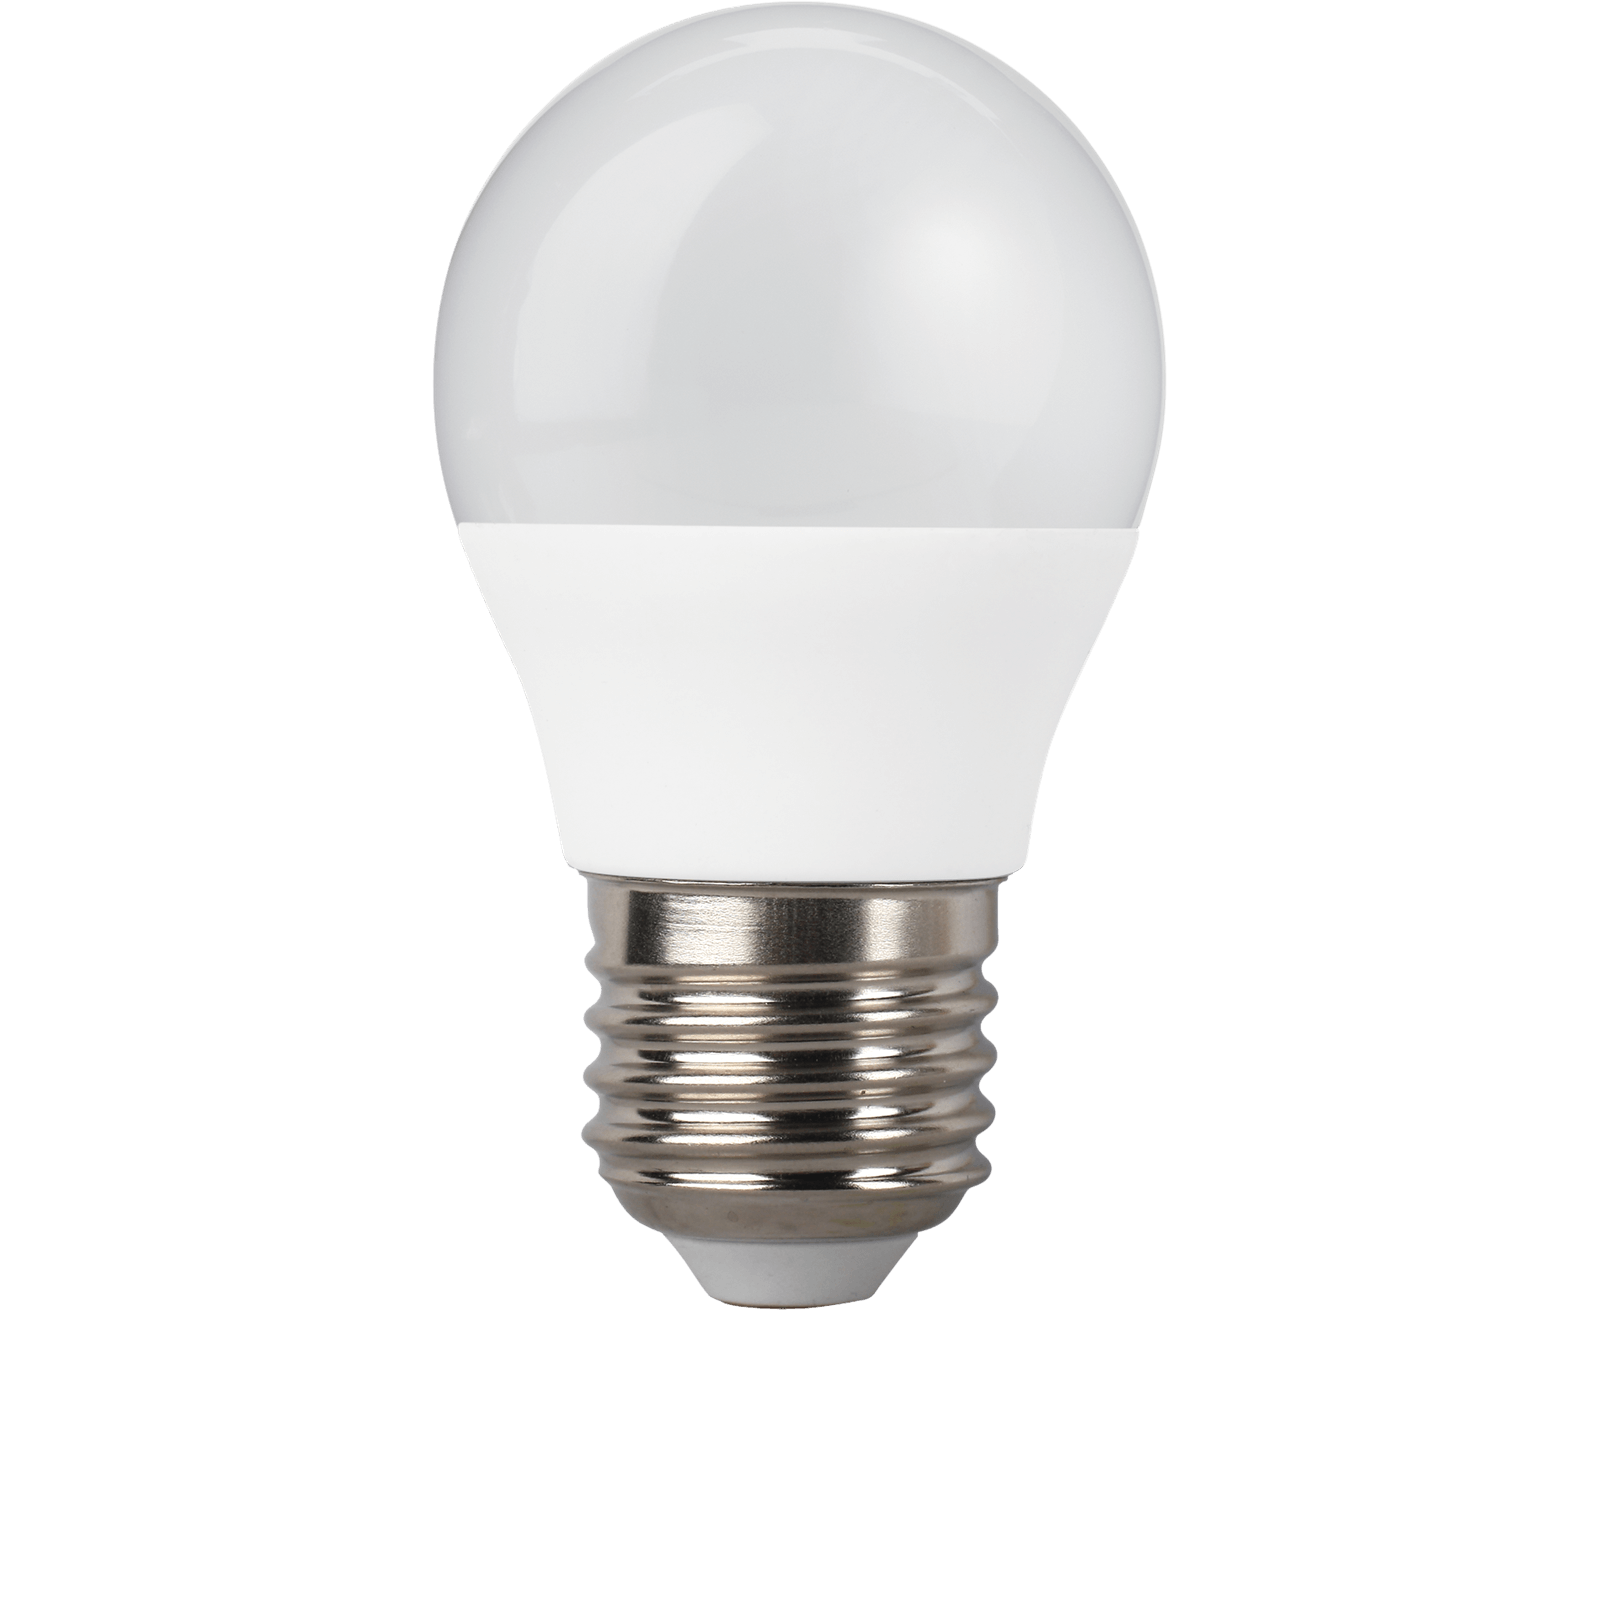 TCP LED Globe 40W ES Warm Non Dimmable Light Bulb